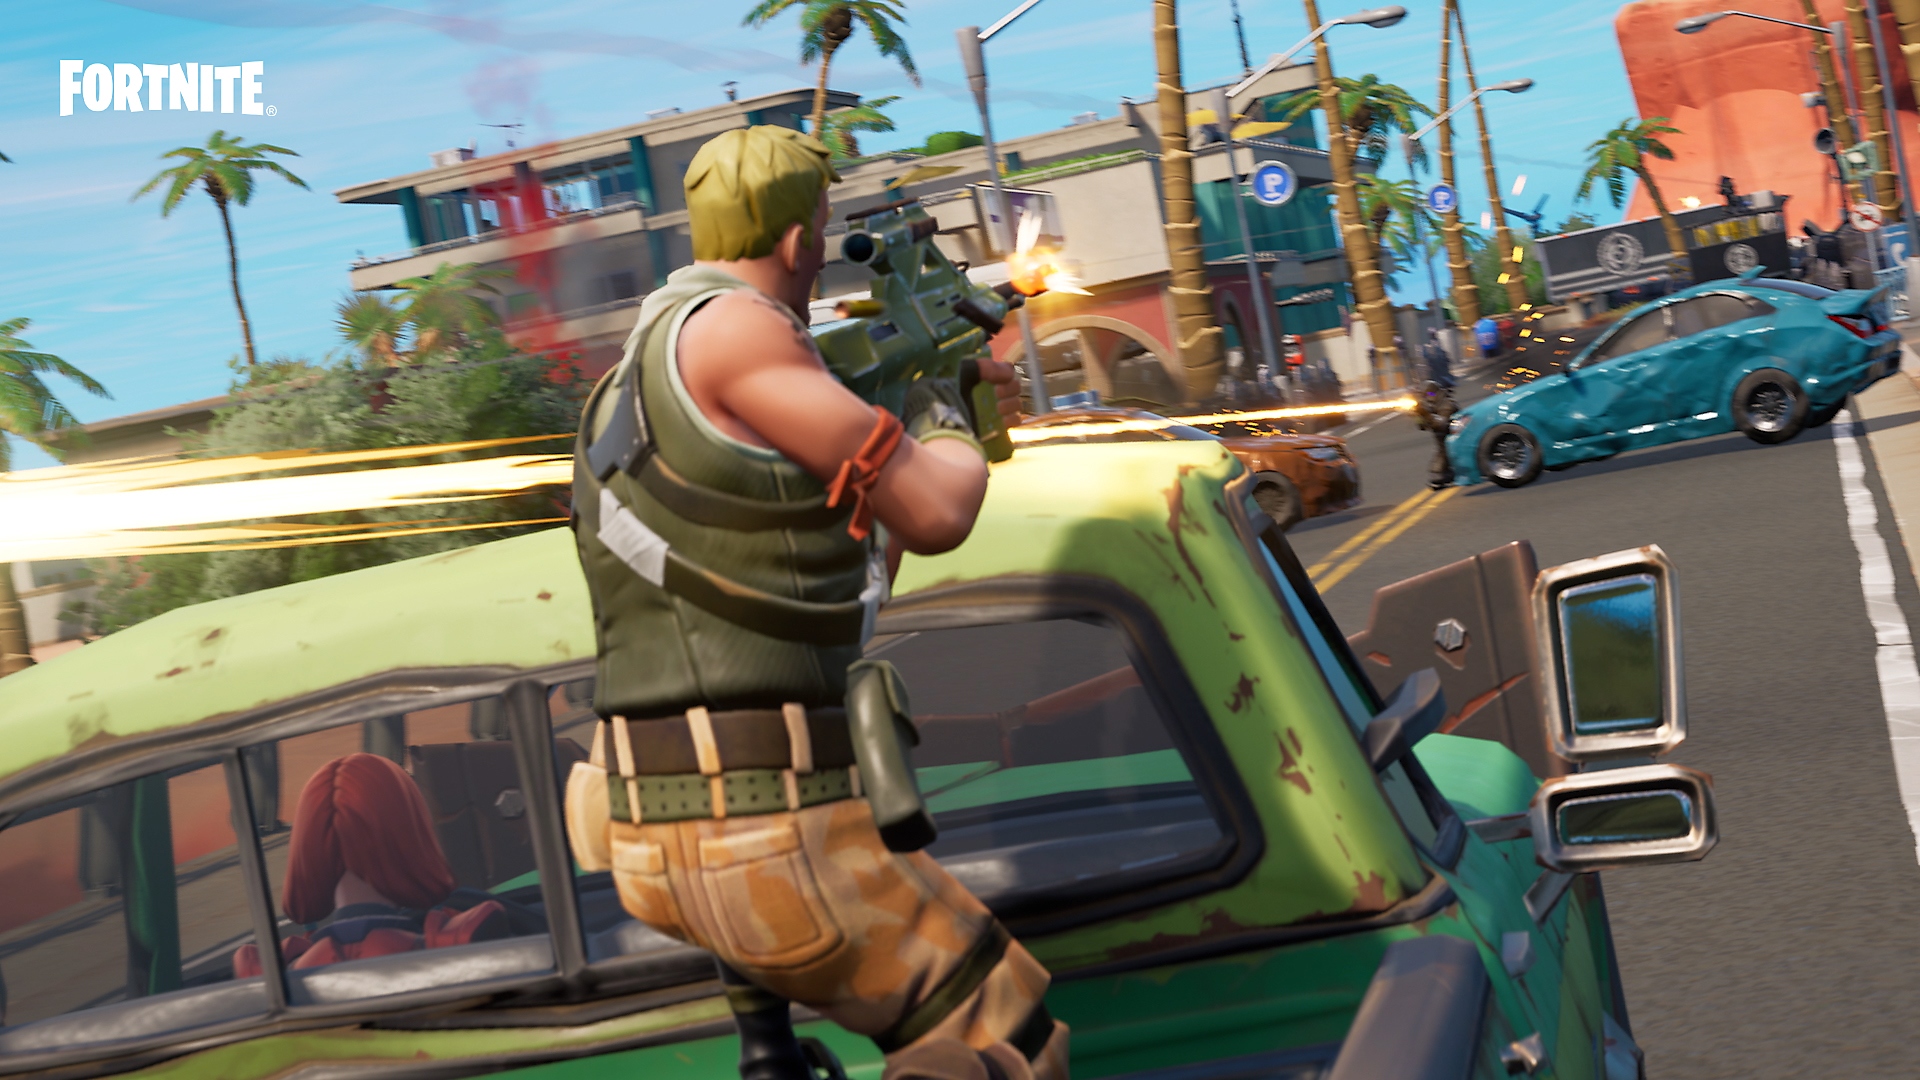 Fortnite zero build mode - character shooting while taking cover in a pickup truck